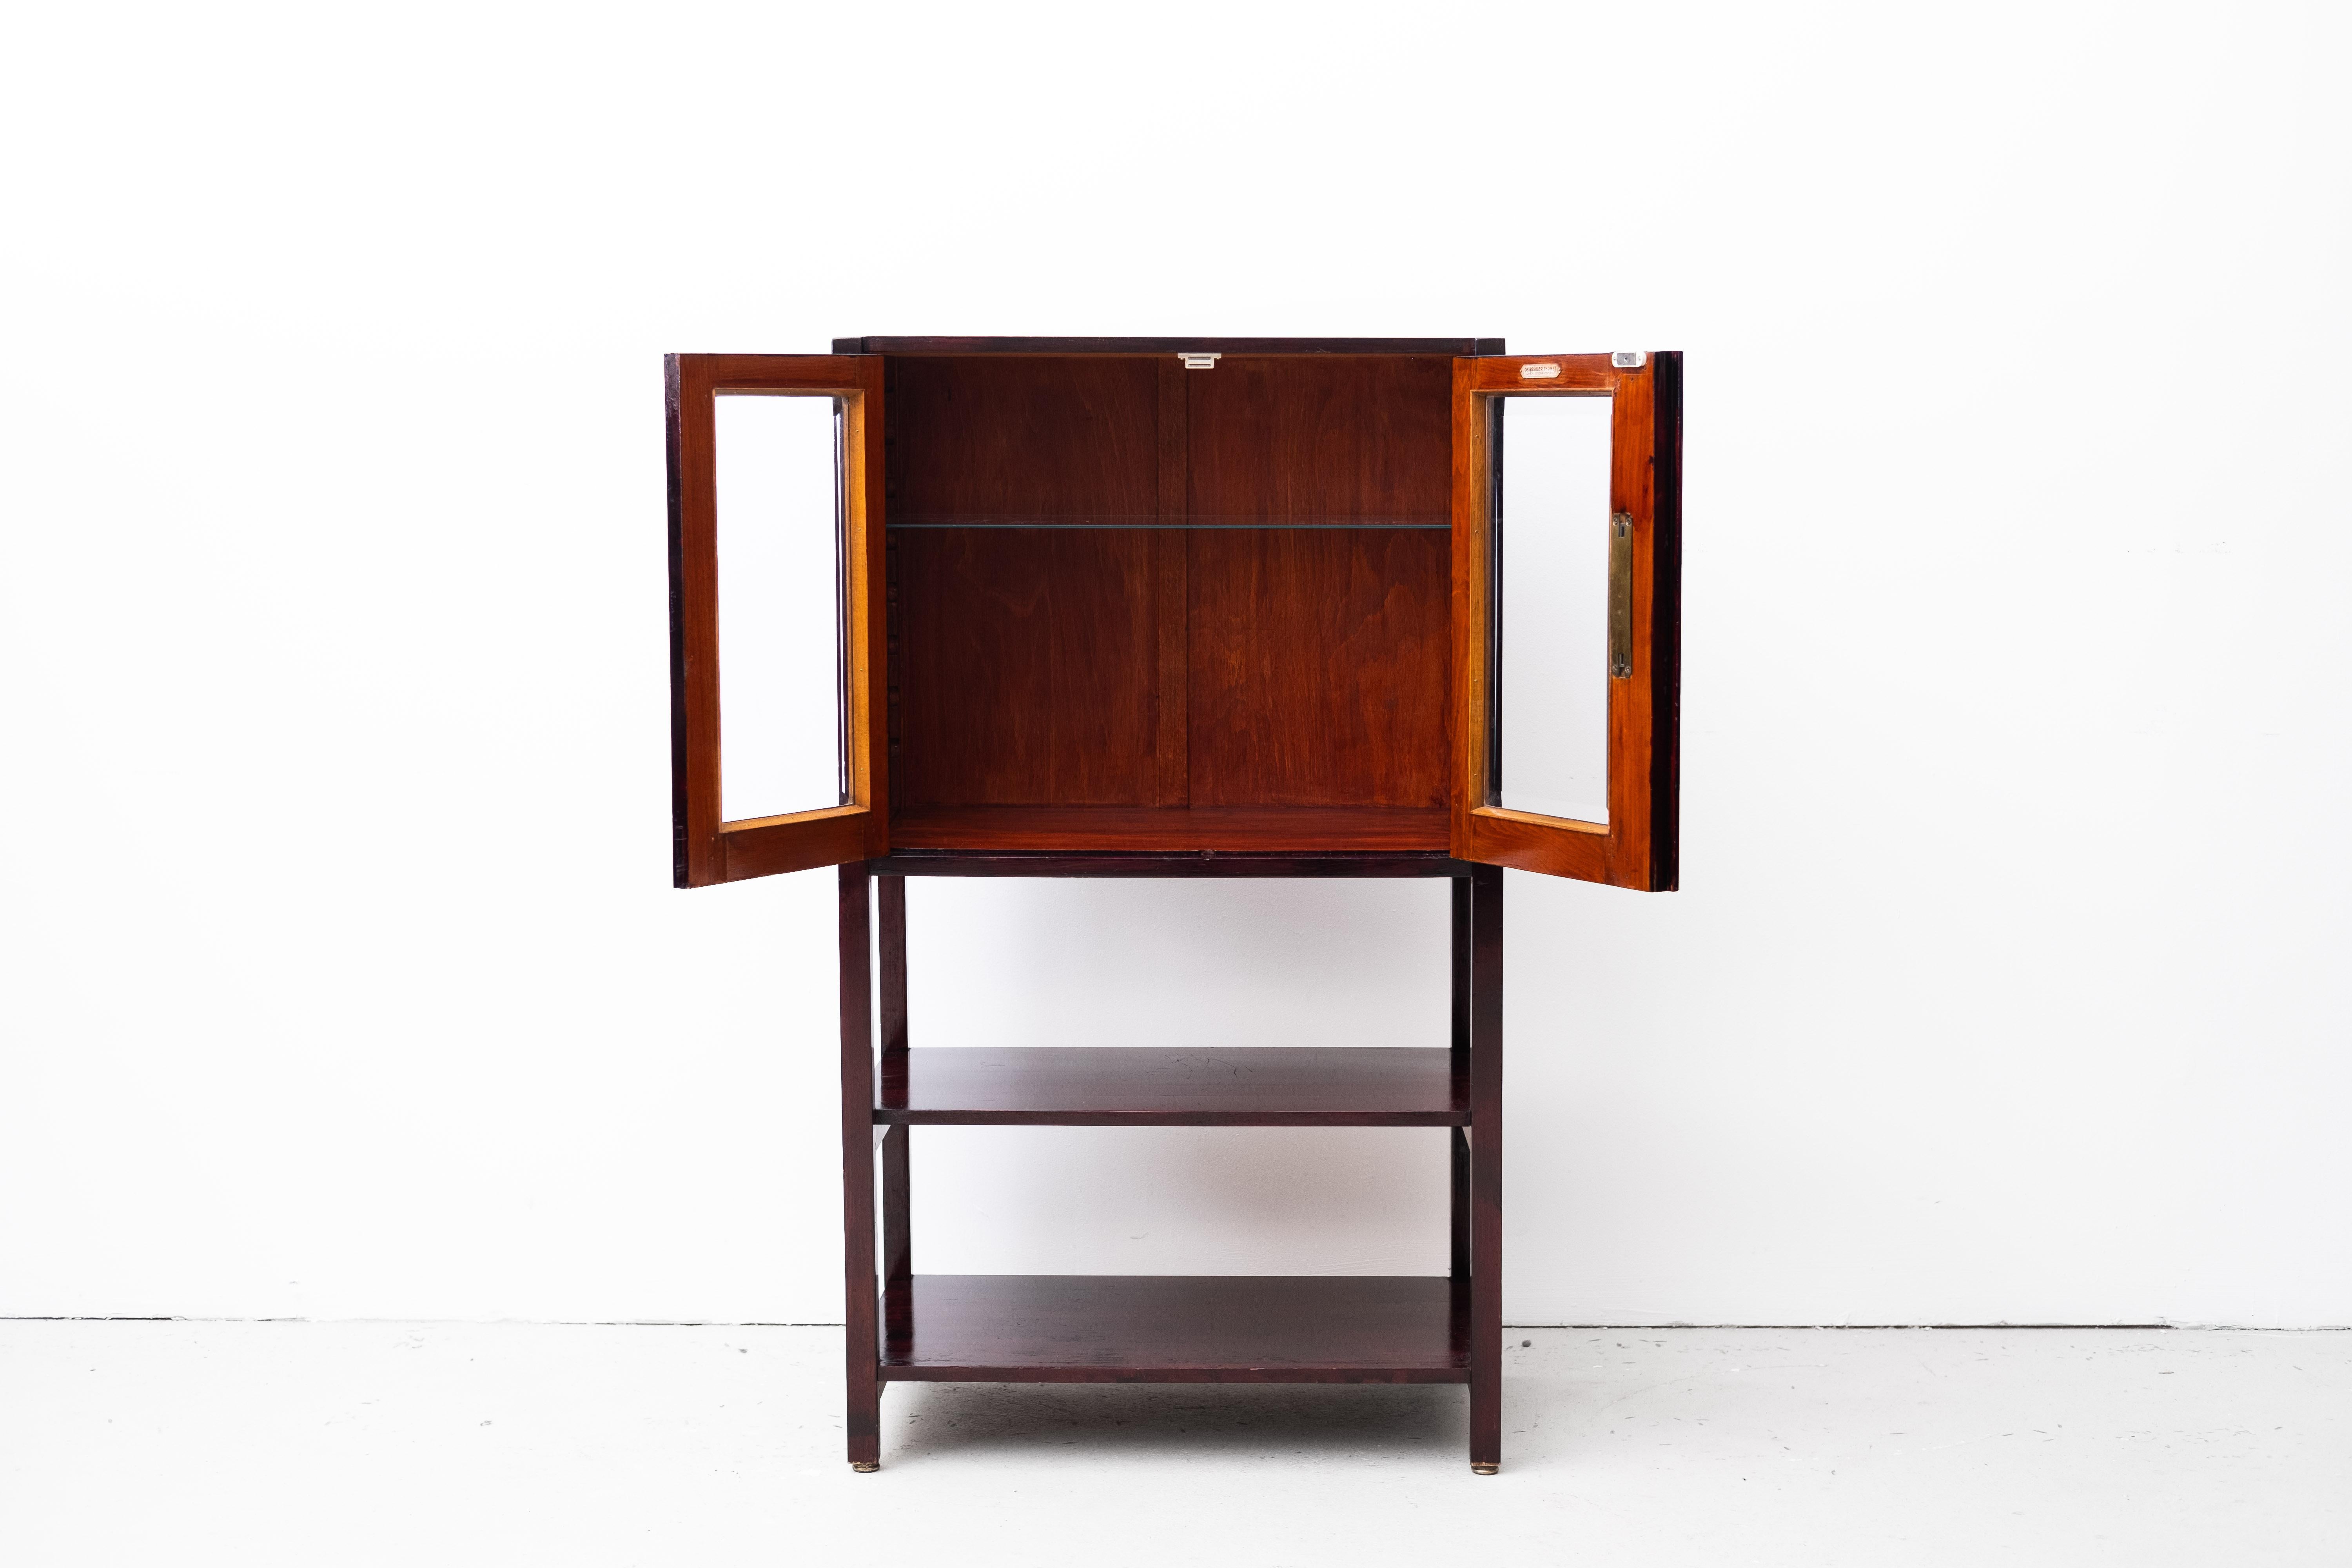 Early 20th Century Small Art Nouveau Cabinet by Thonet Brothers (Vienna, 1910) For Sale